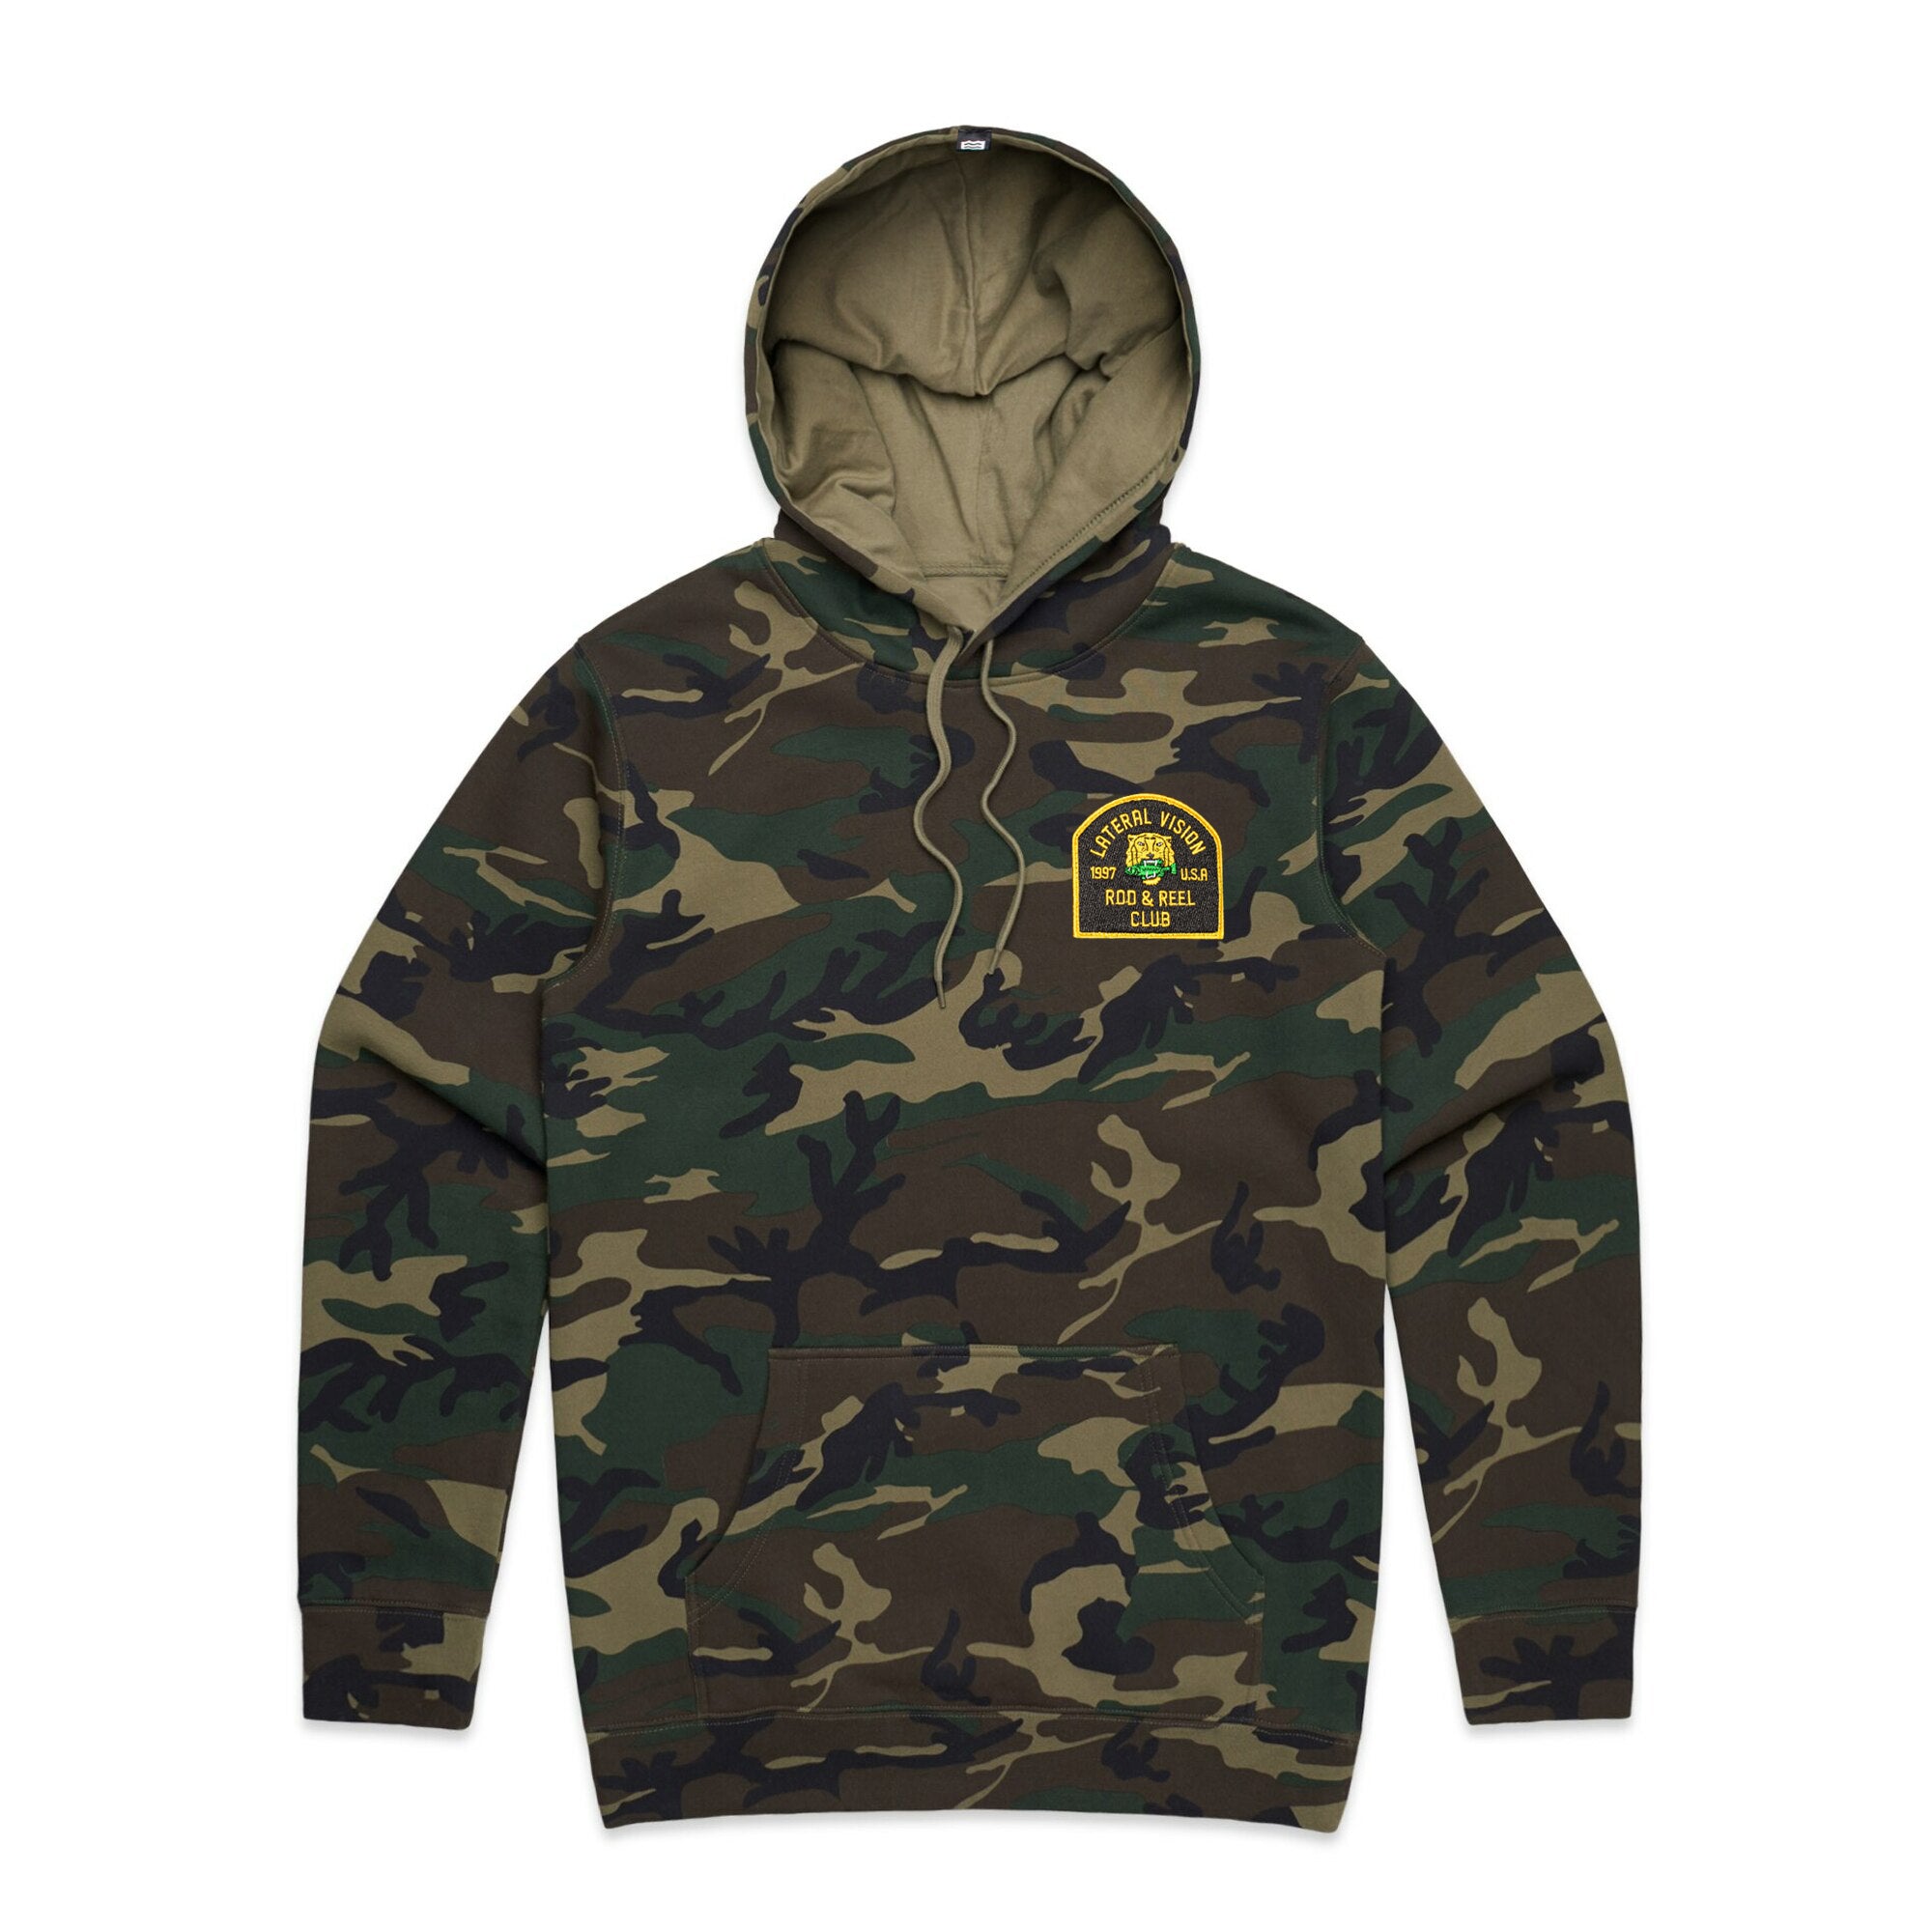 Tiger Camo Hoodie (Green Camo) by Lateral Vision